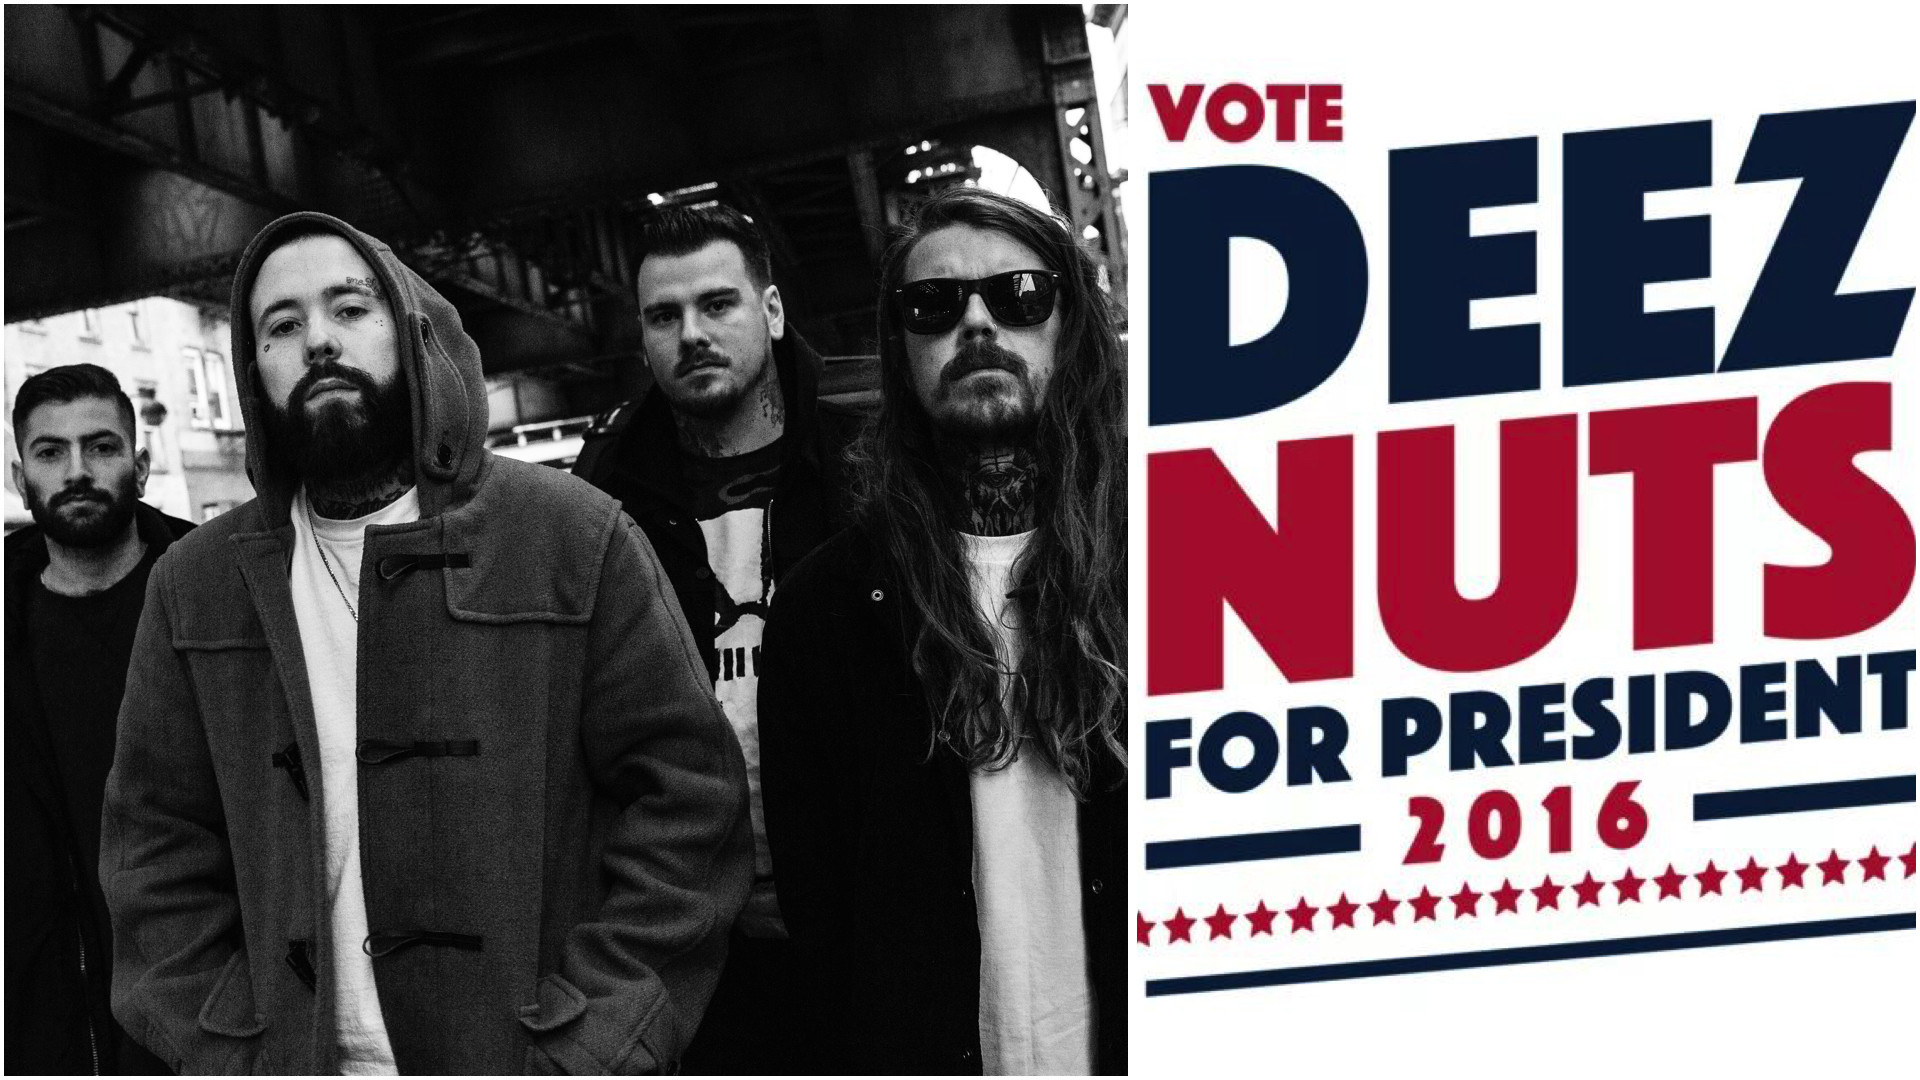 1920x1080 Melbourne's Deez Nuts Discover What It's Like To Run For President Of The US